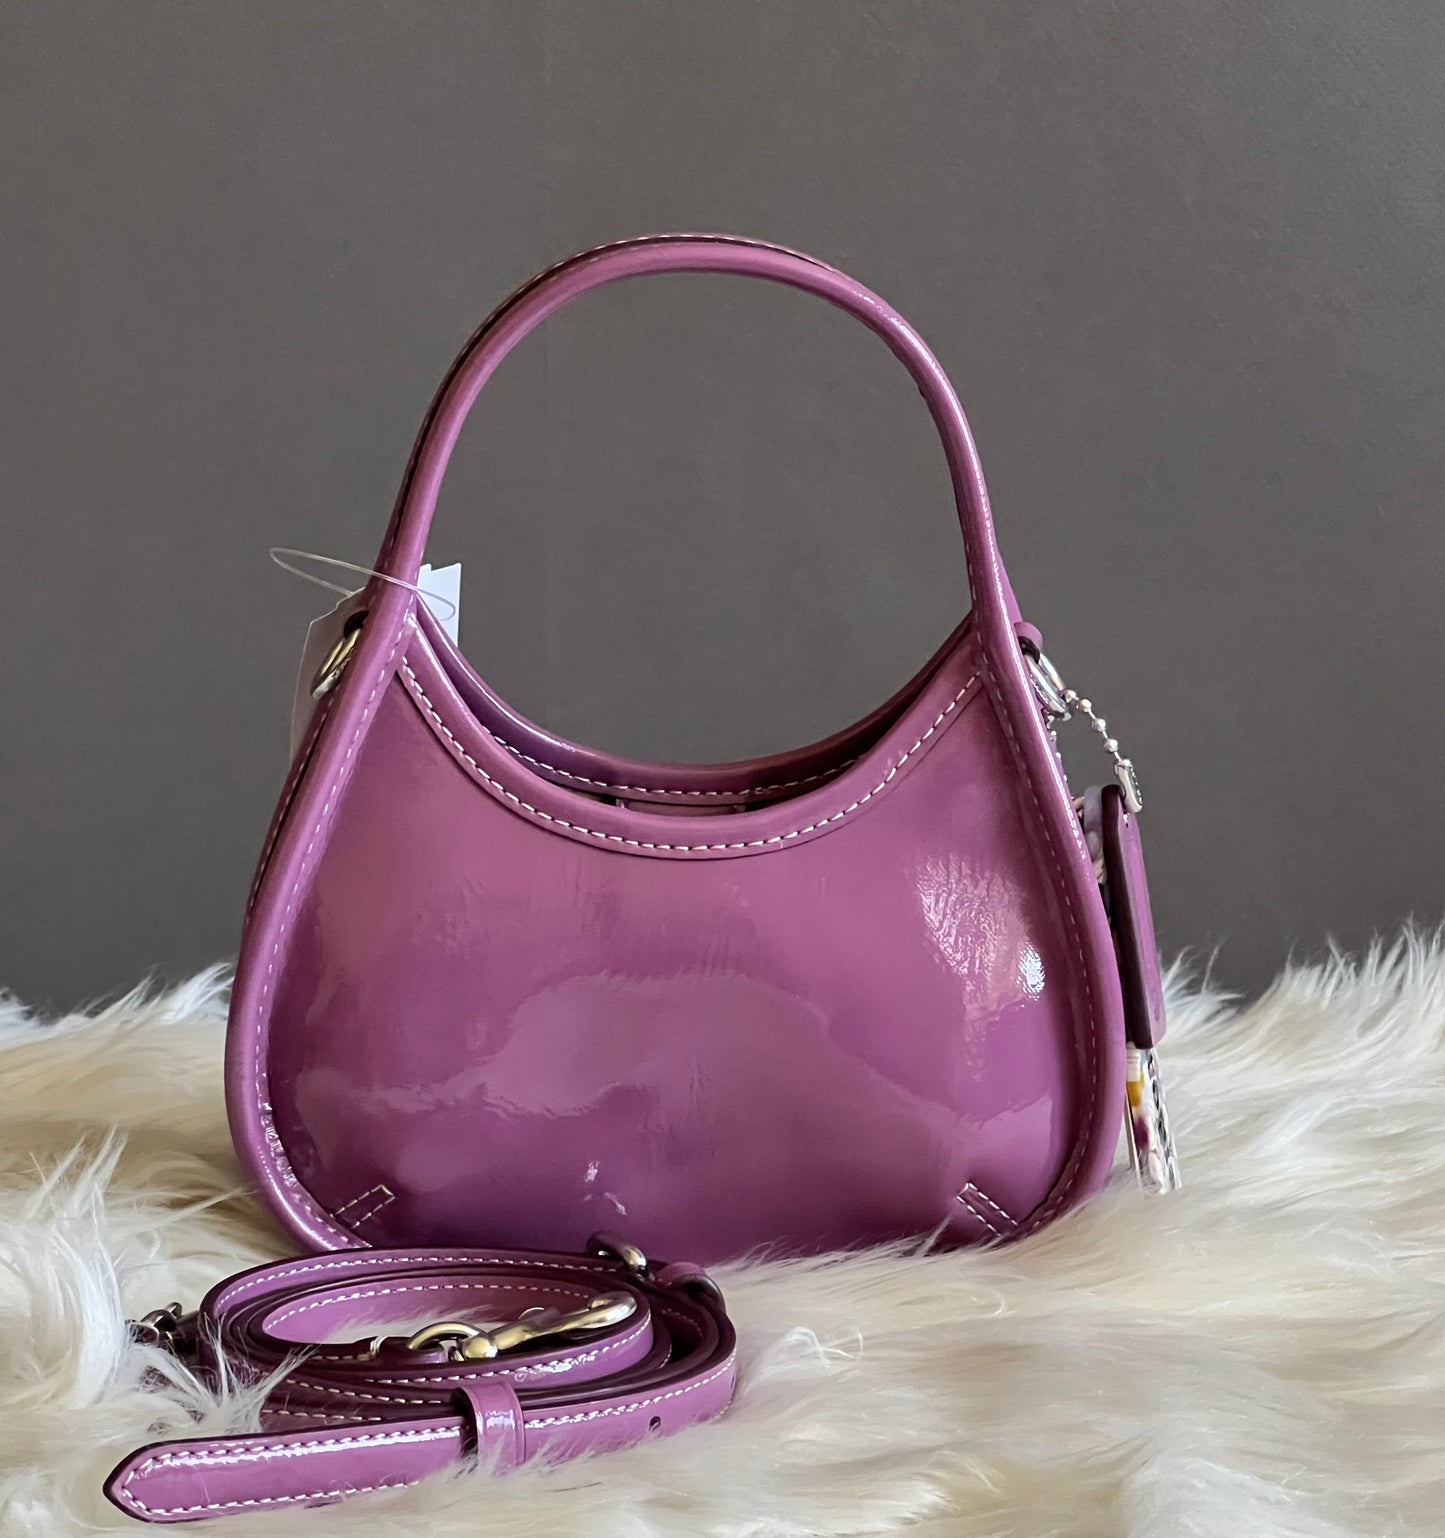 Coach Mini Ergo Bag with Crossbody Strap in Crinkled Patent Leather